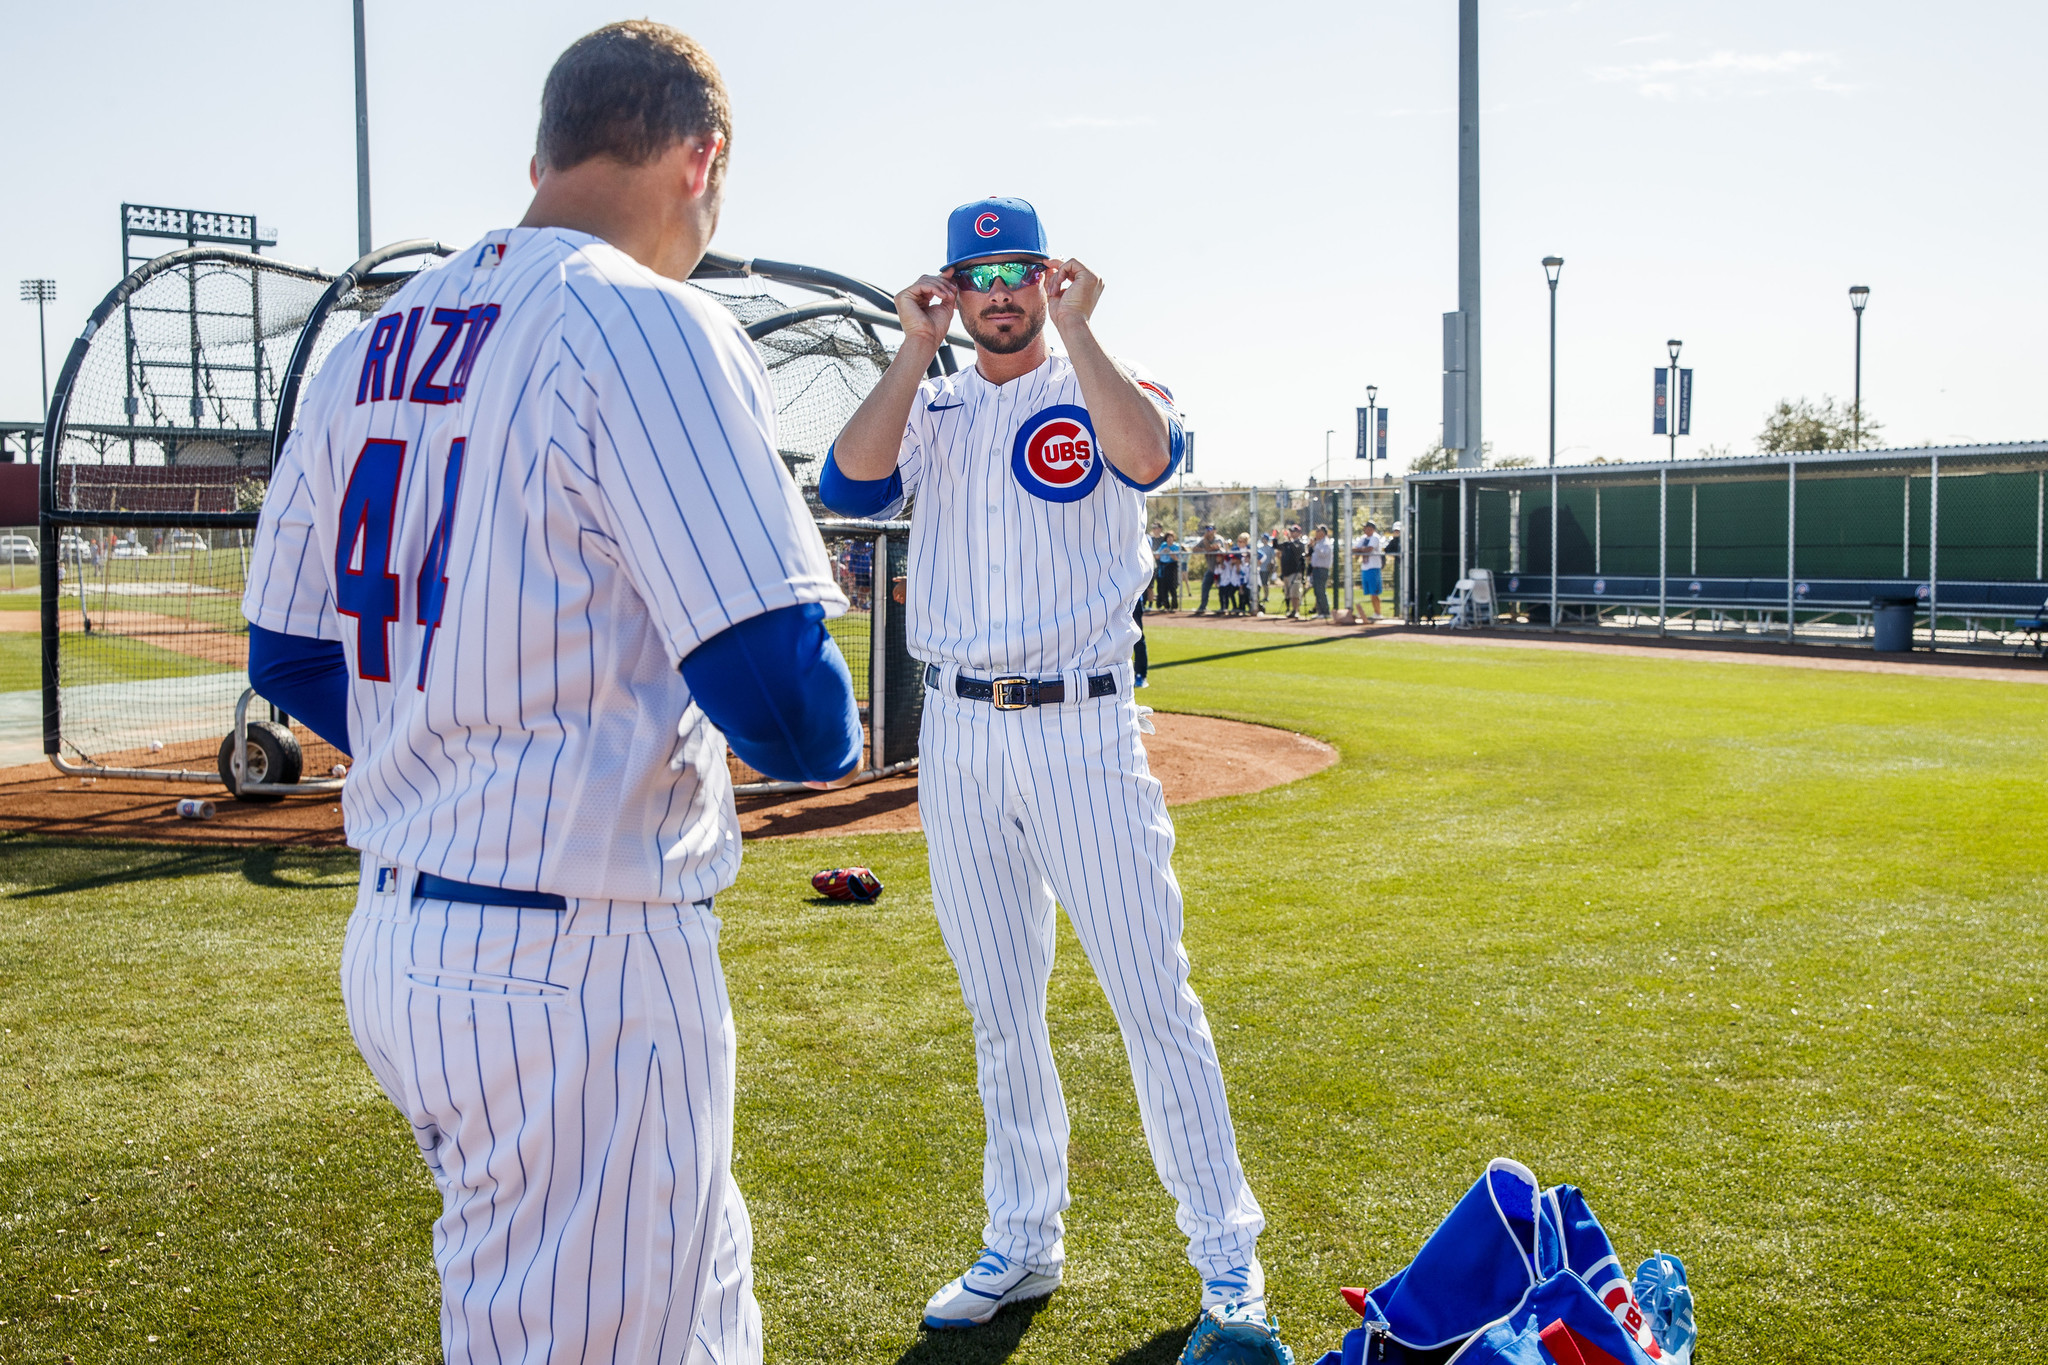 You need to see this prom photo of Anthony Rizzo and Kris Bryant